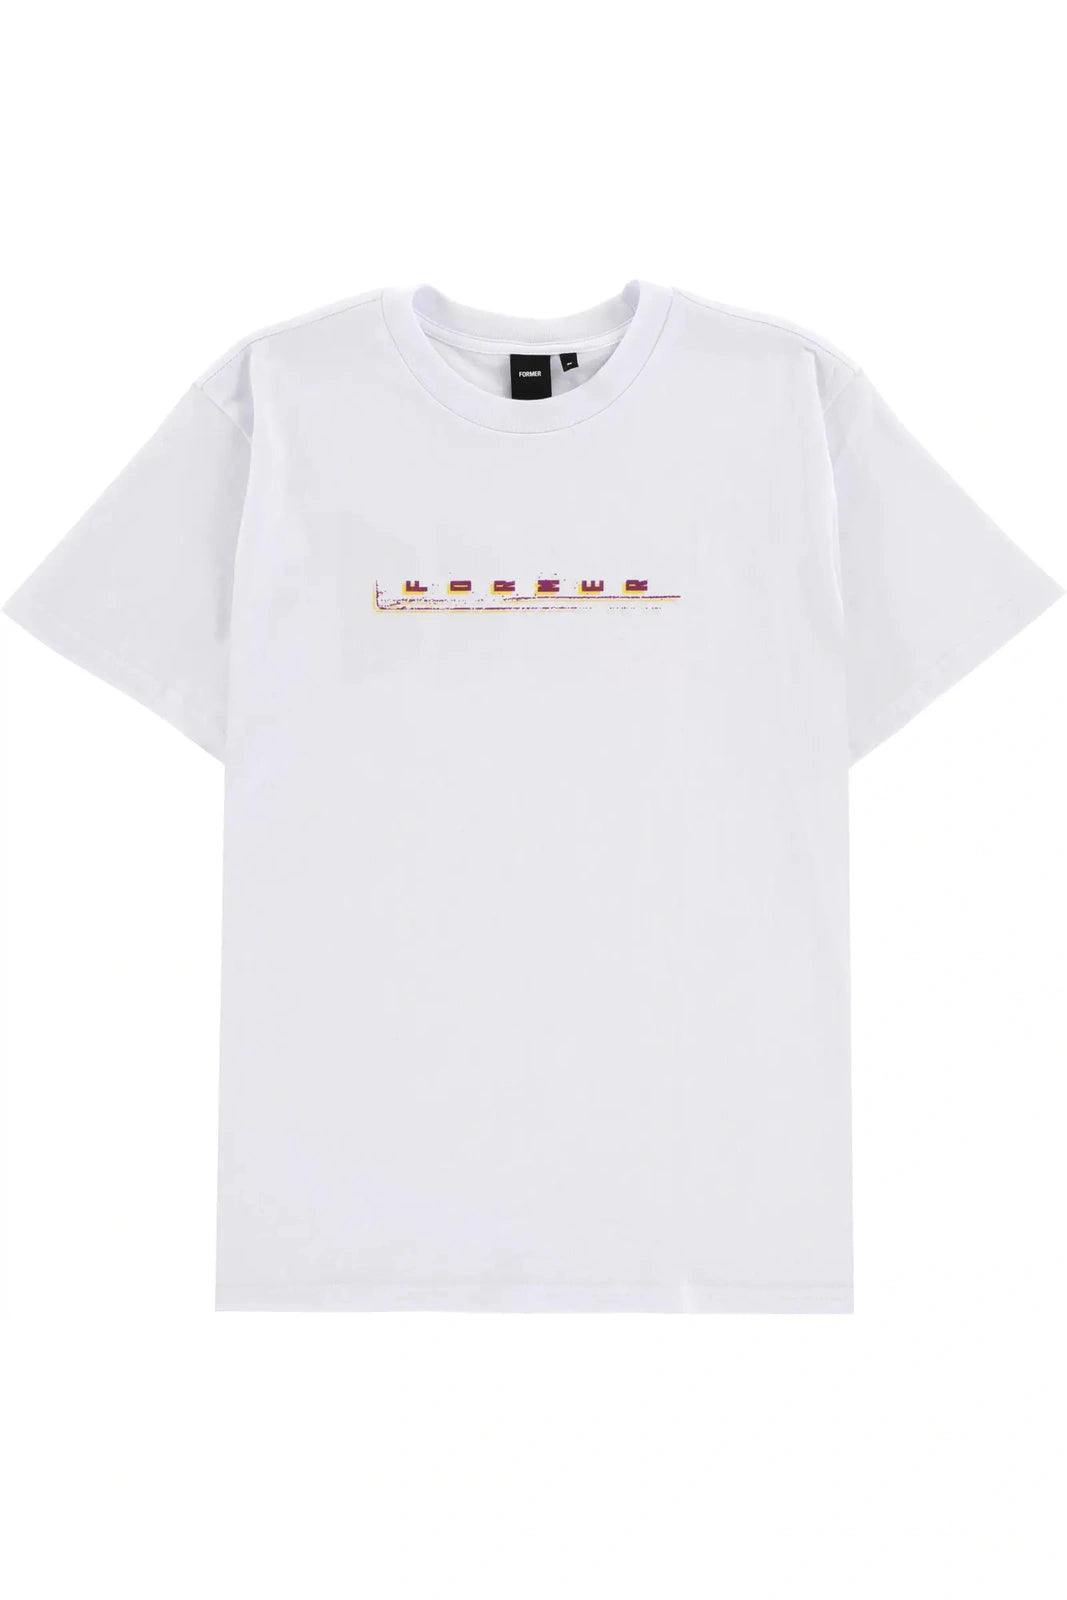 Former- conceal t-shirt white